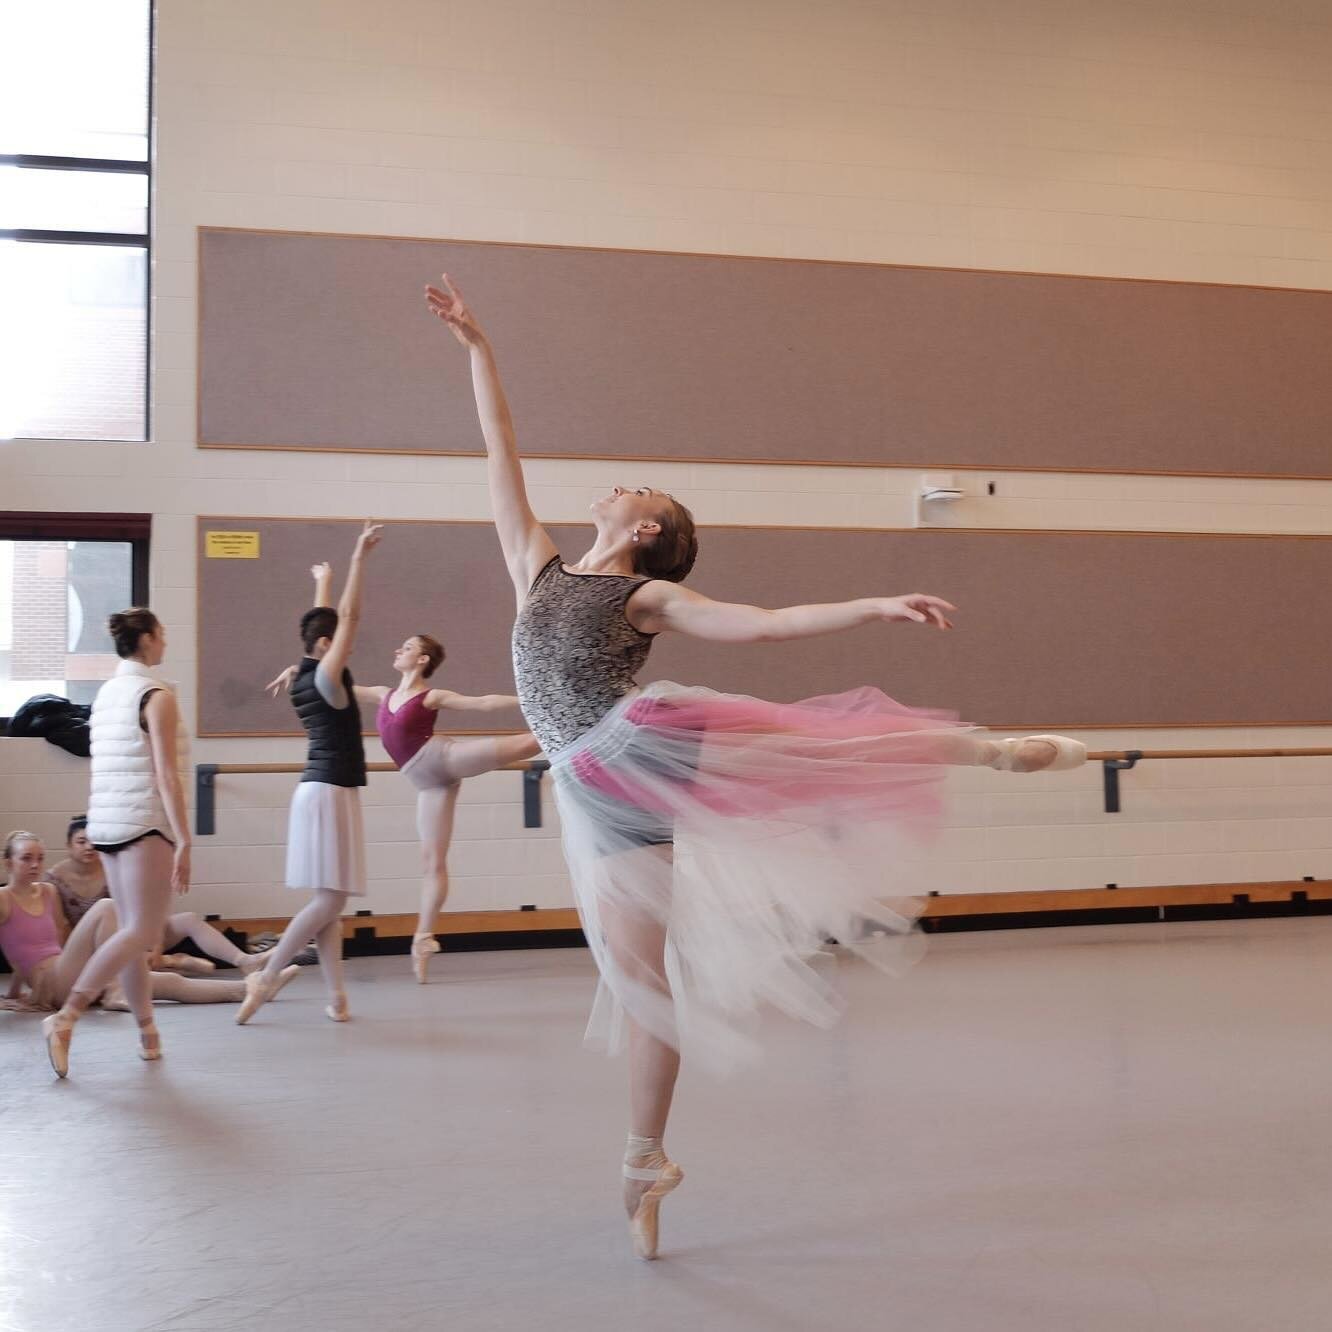 We were featured in @thechrony! 

Professor Maggie Wright Tesch told the Crony that &ldquo;Serenade&rdquo; is an exciting piece for the School of Dance to perform. Tesch responded with enthusiasm that the growth the students are experiencing is expon